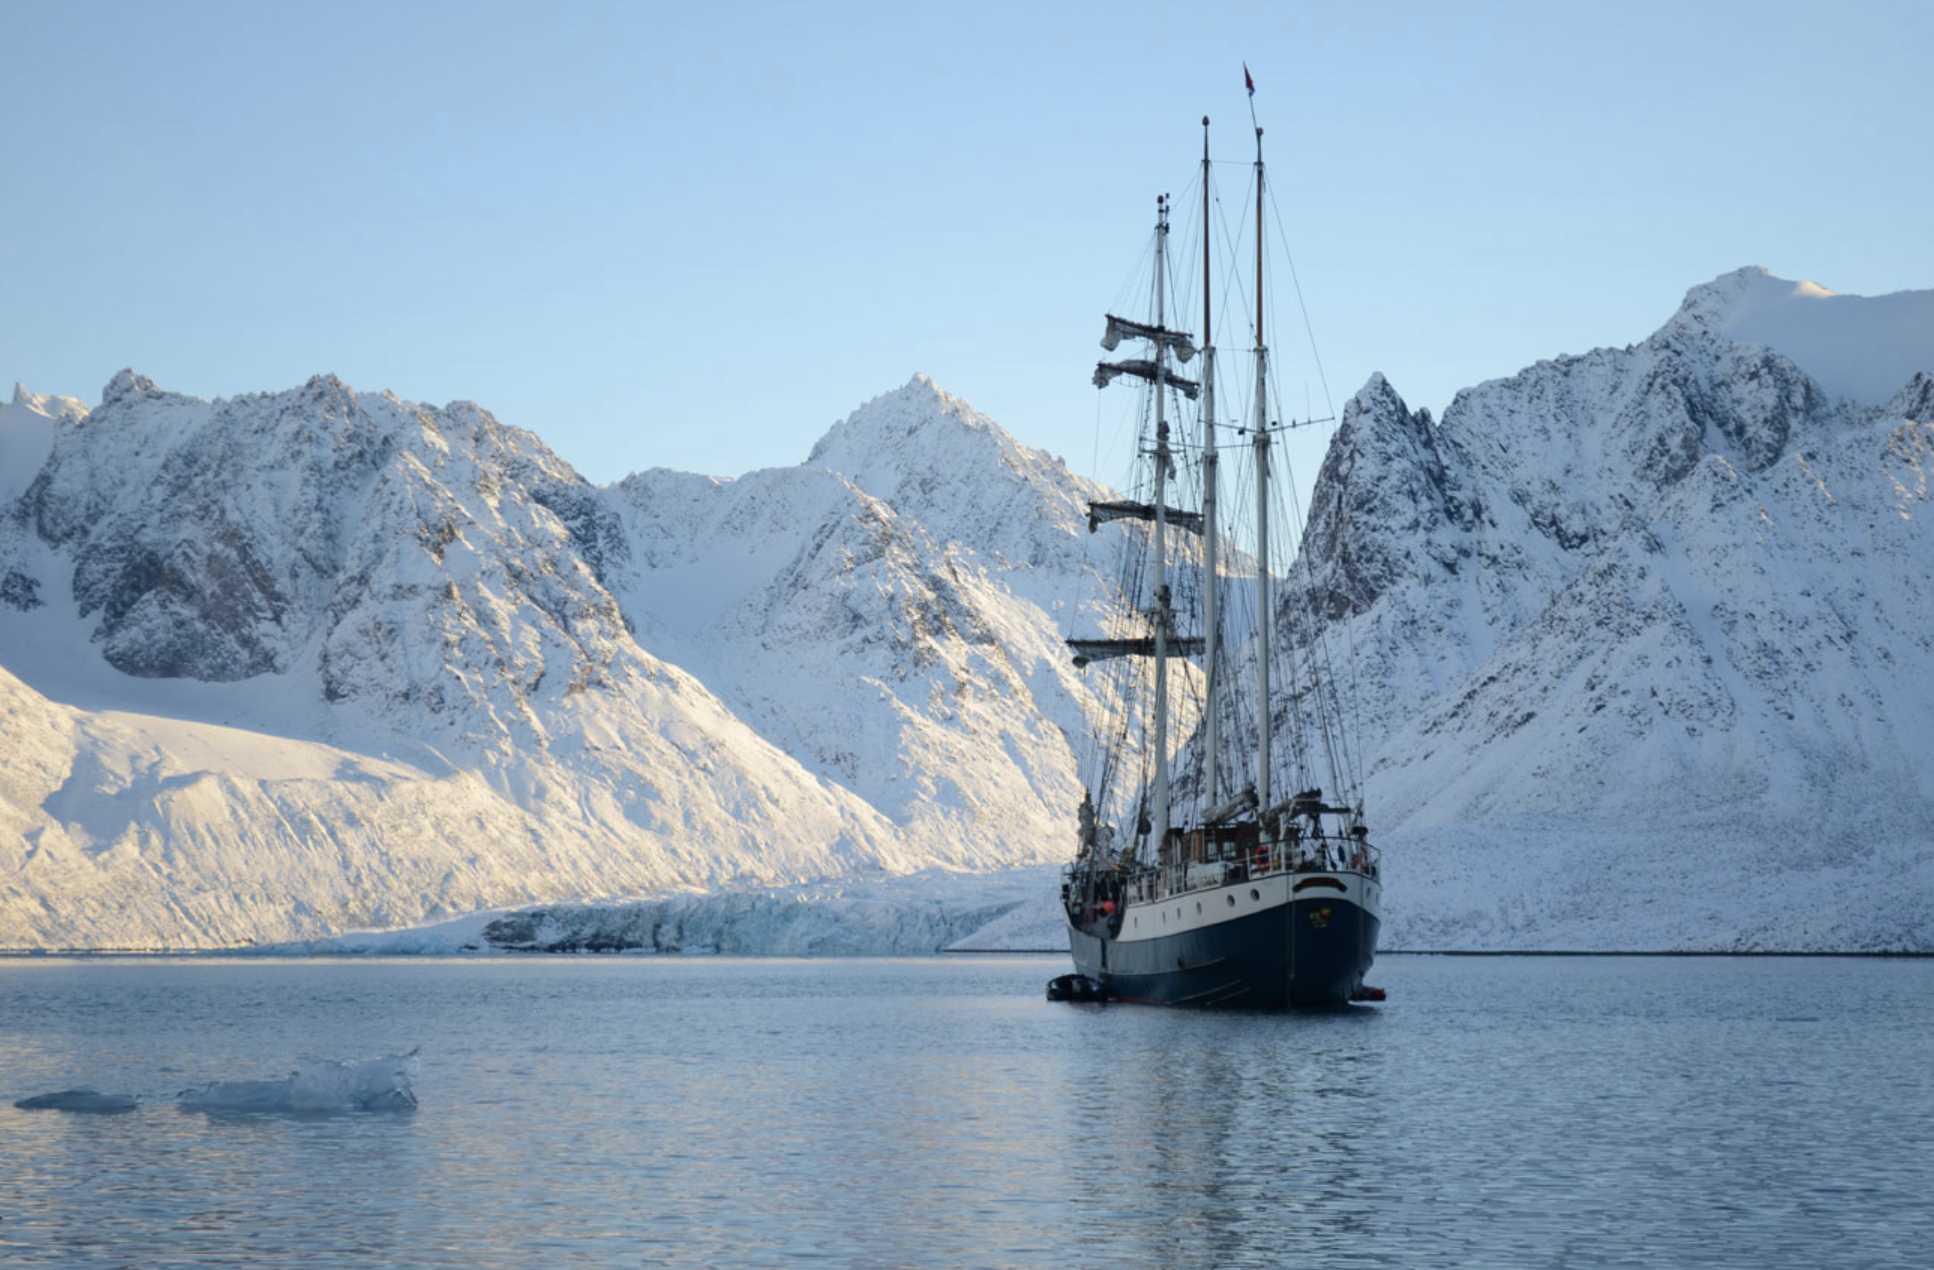 The Arctic Circle, an international expedition-residency with artists and scientists aboard, a sailing vessel in the High Arctic Svalbard archipelago